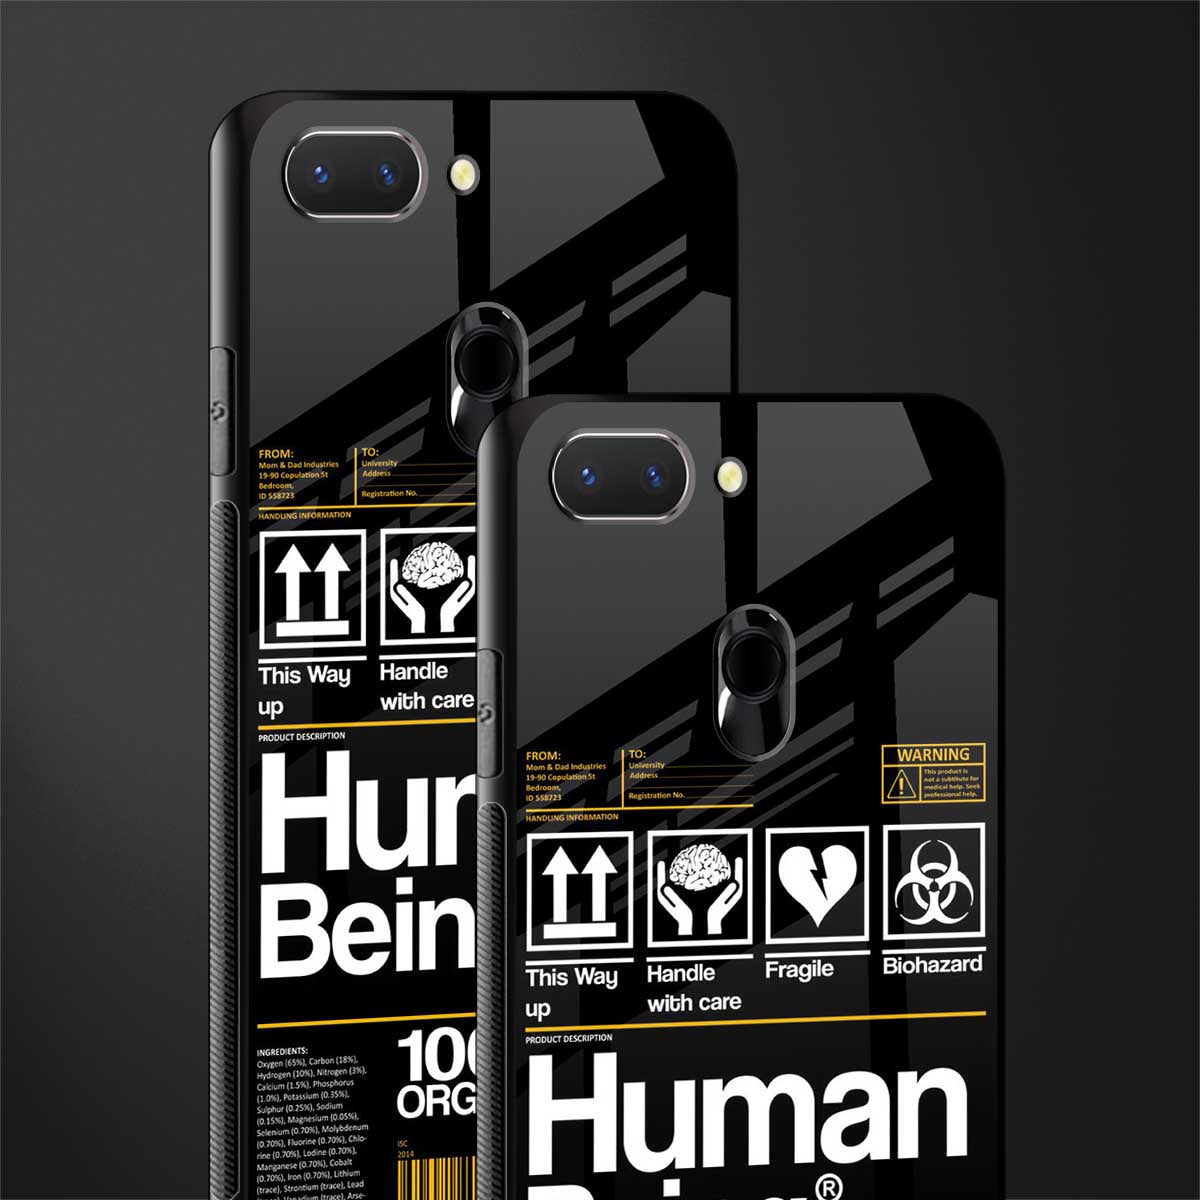 human being label phone cover for realme 2